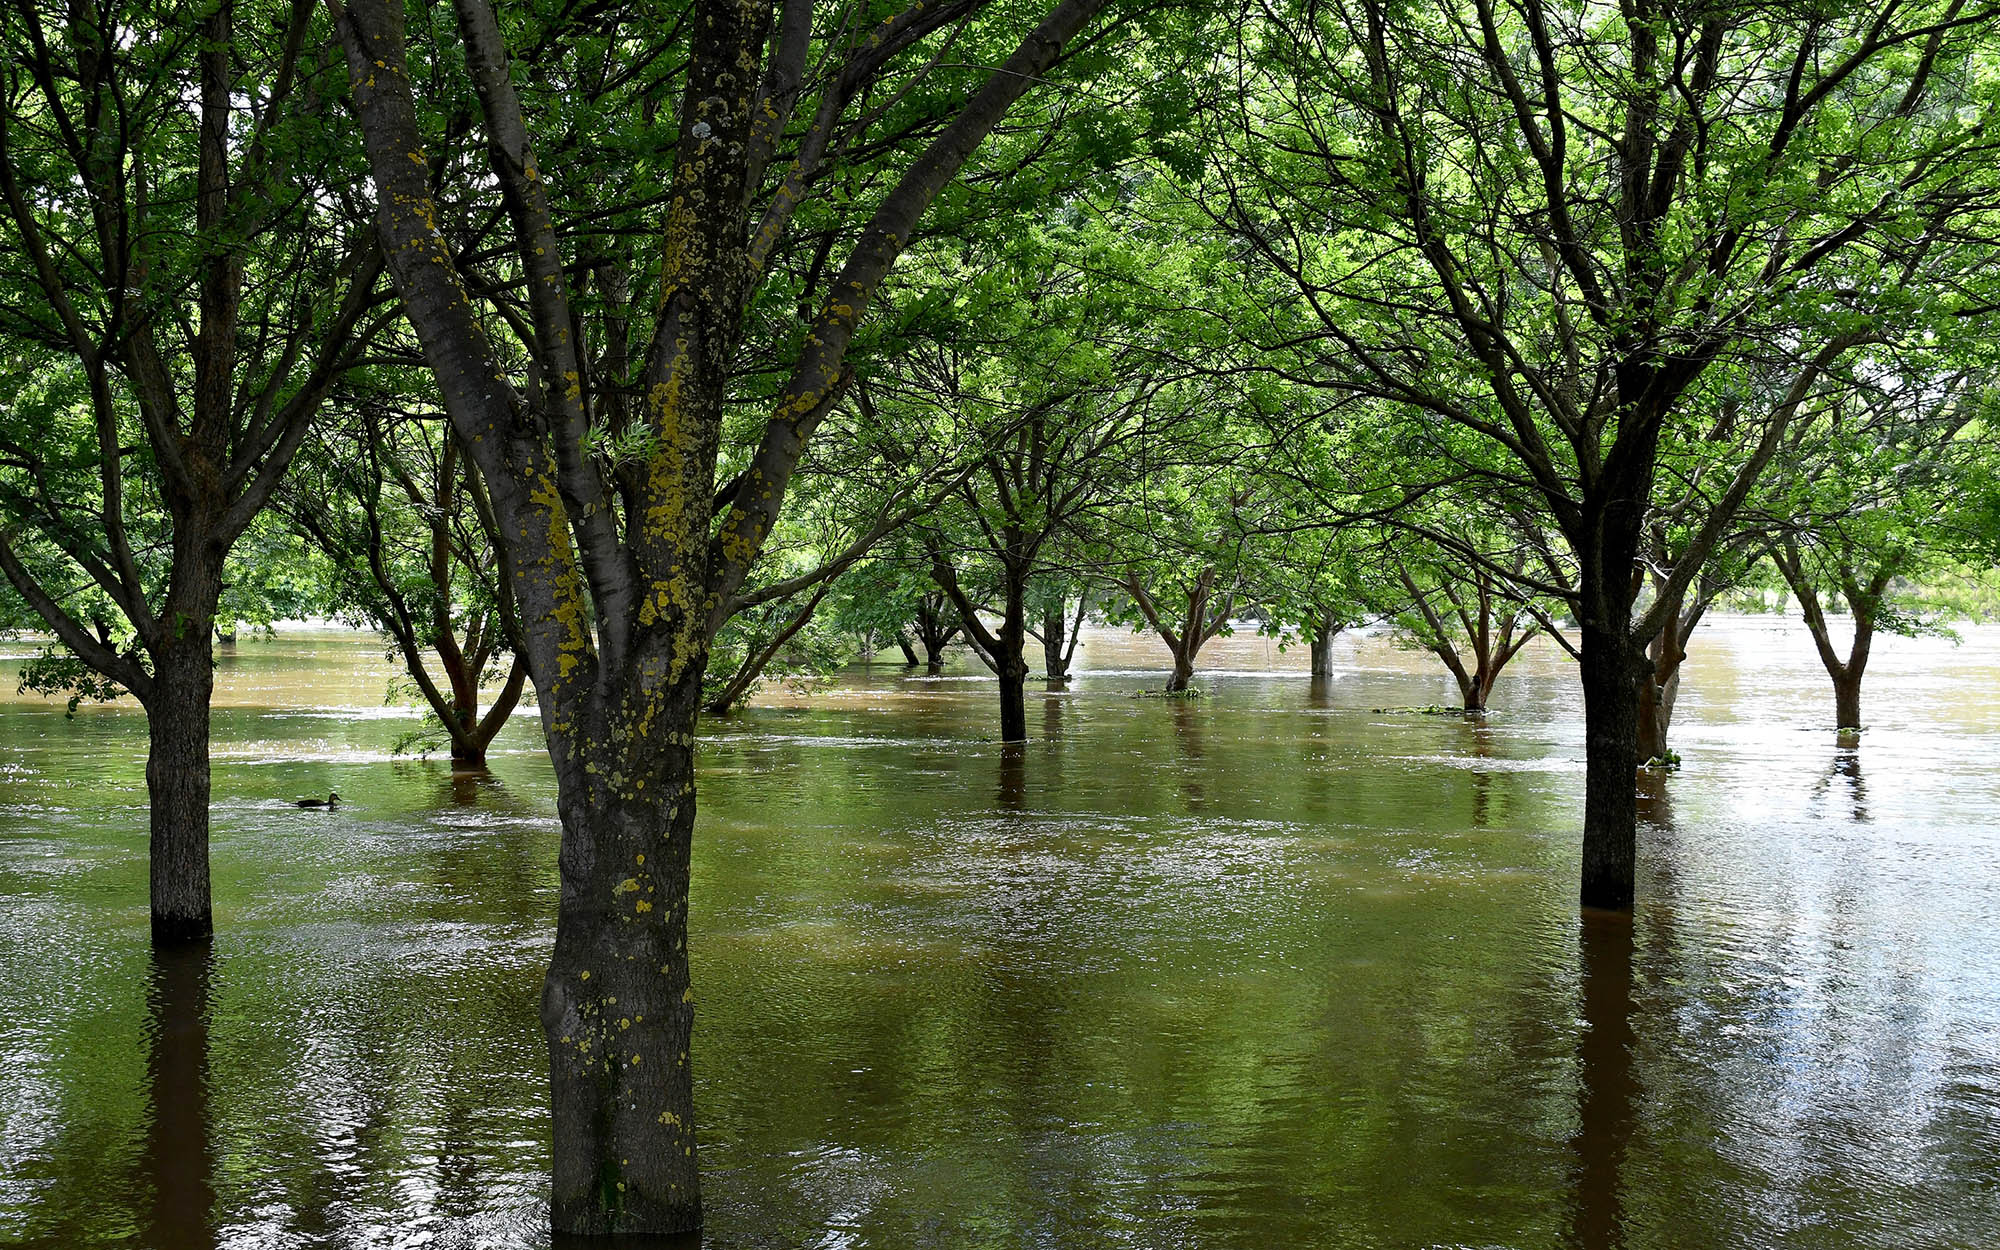 Trees submerged in water from flooded Lachlan River in Cowra, during November 2021 floods in central west NSW, Australia.